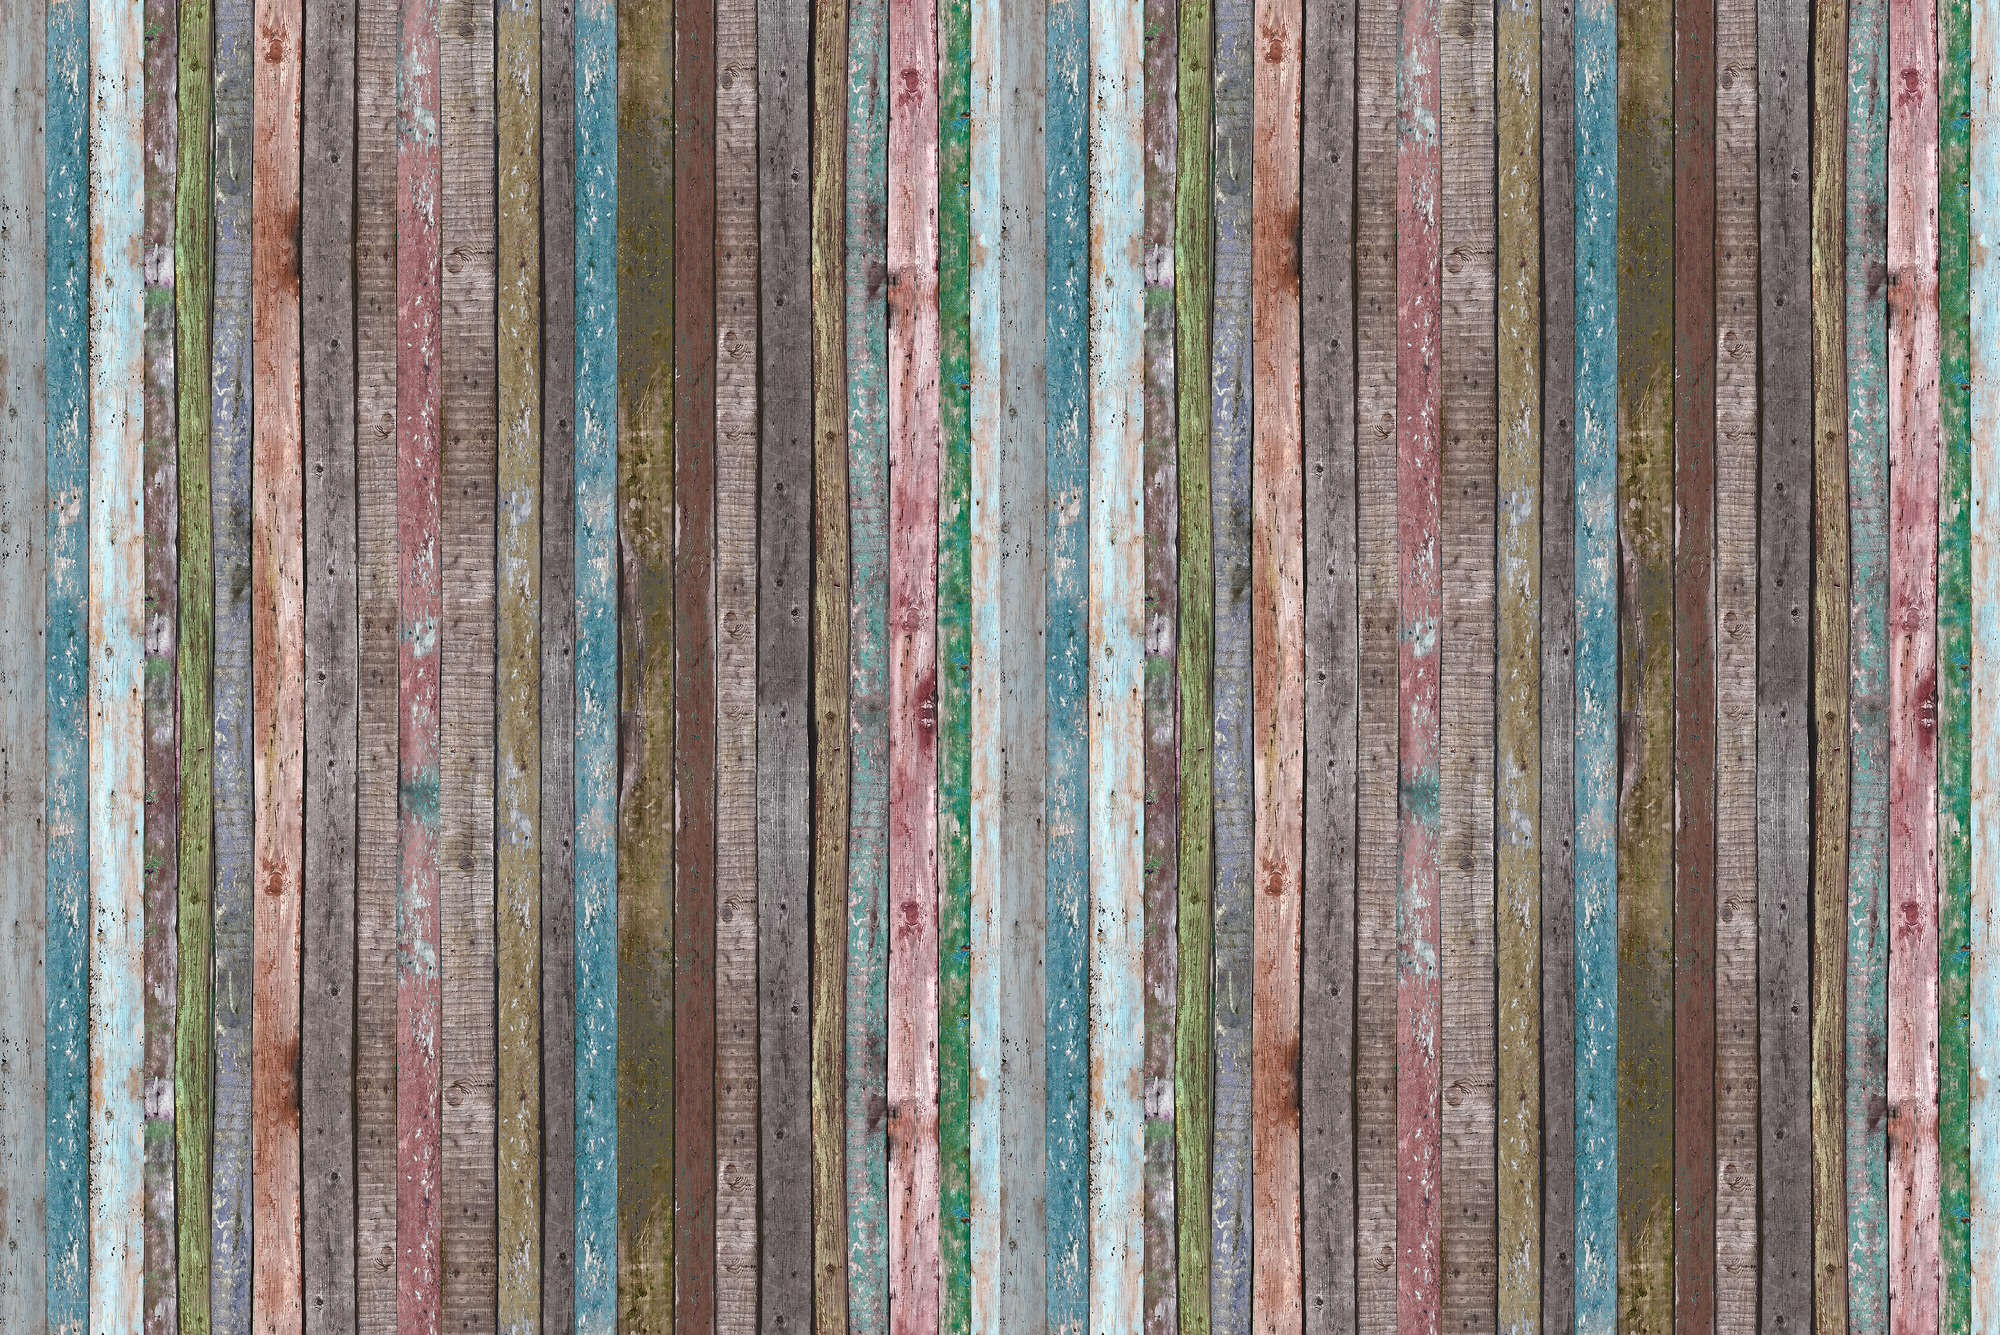             Wood photo wallpaper fence of boards brown turquoise on structural non-woven
        